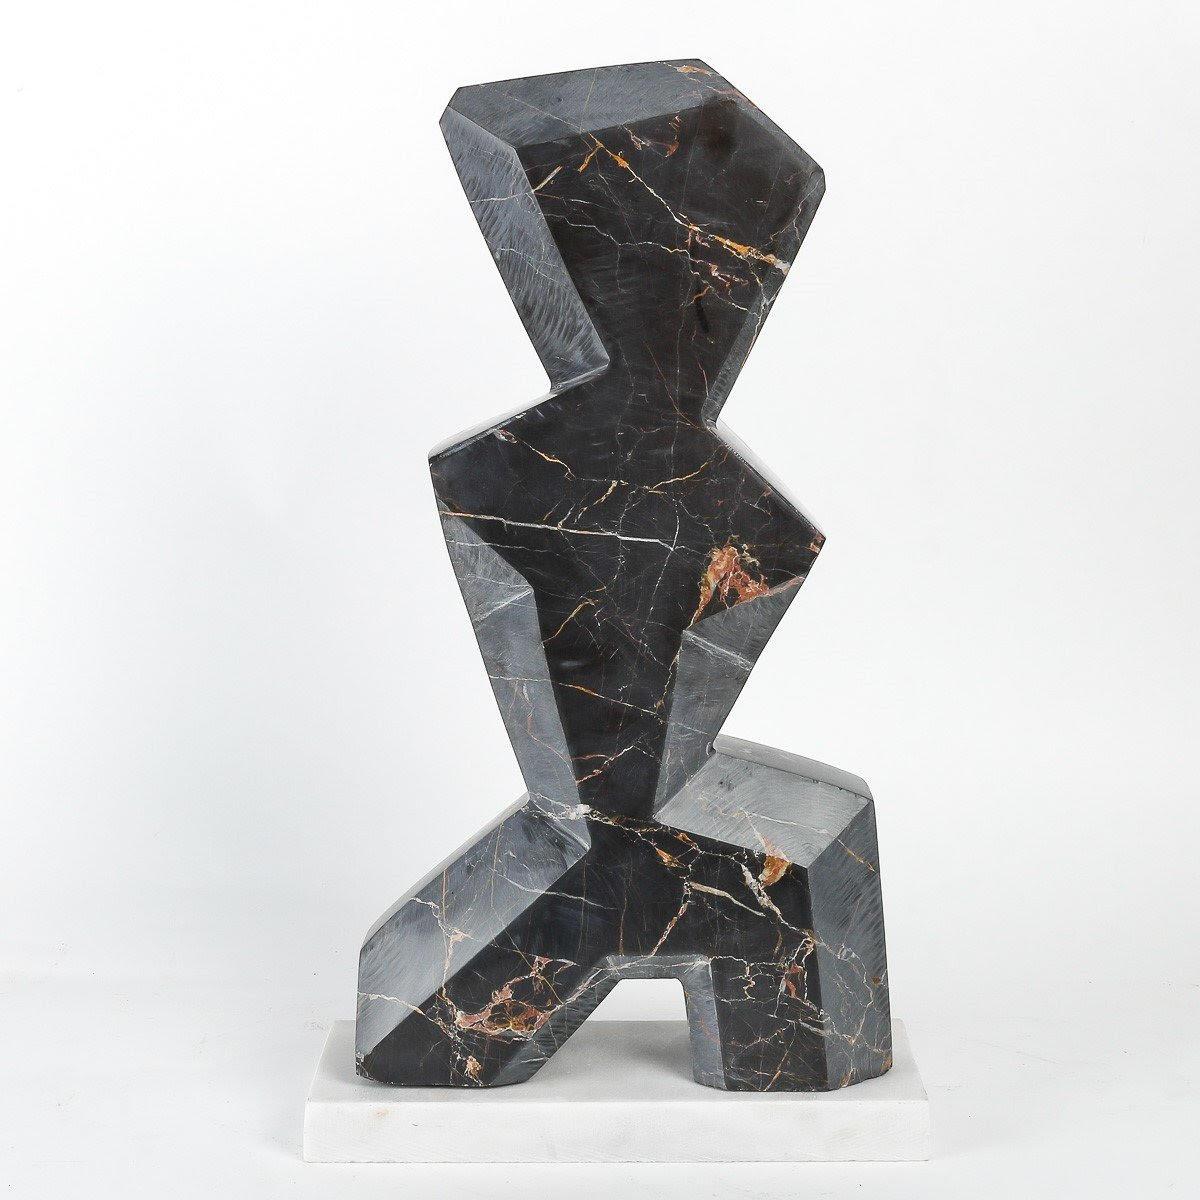 Contemporary Marble Sculpture by Artist François Fernandez, known as SAVY, Circa 2001.

Marble sculpture by the artist François Fernandez, known as Savy, signed SAVY and dated 2001.

h: 50cm, w: 27cm, d: 10cm